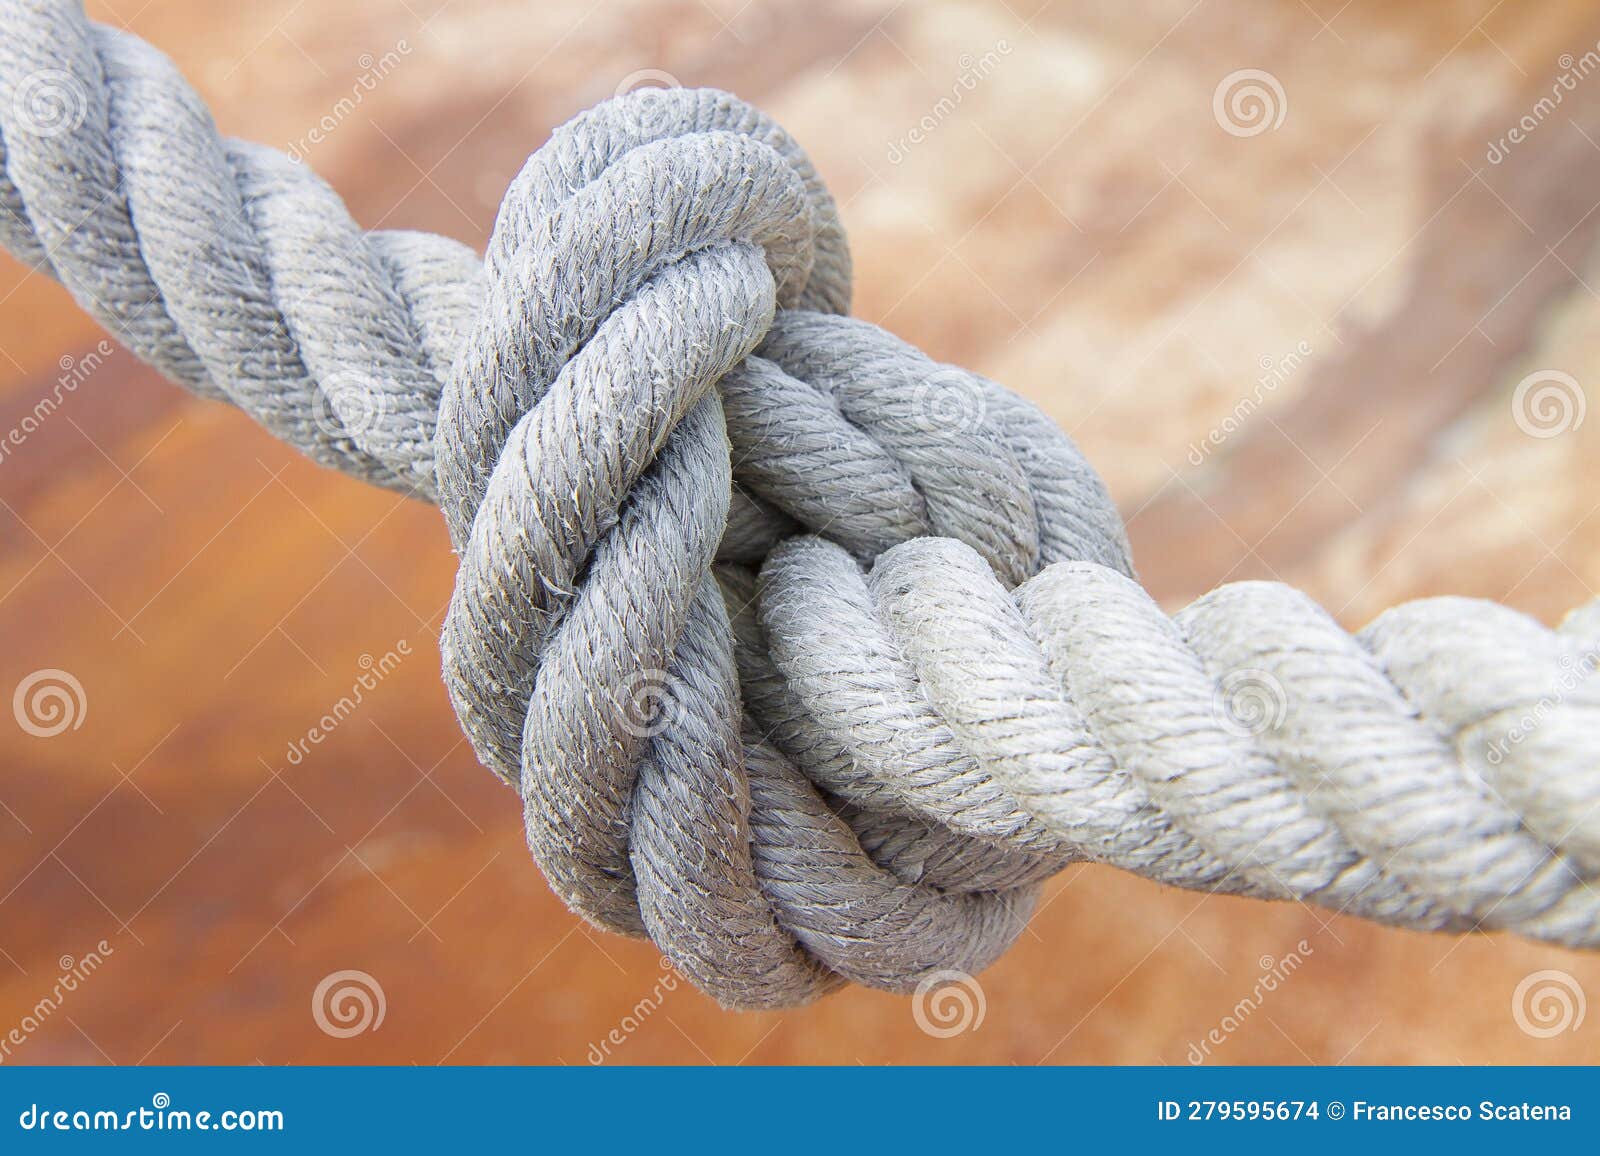 Strong Rope with Single Knot - Concept Image Stock Photo - Image of burl,  rope: 279595674, Strong Rope 